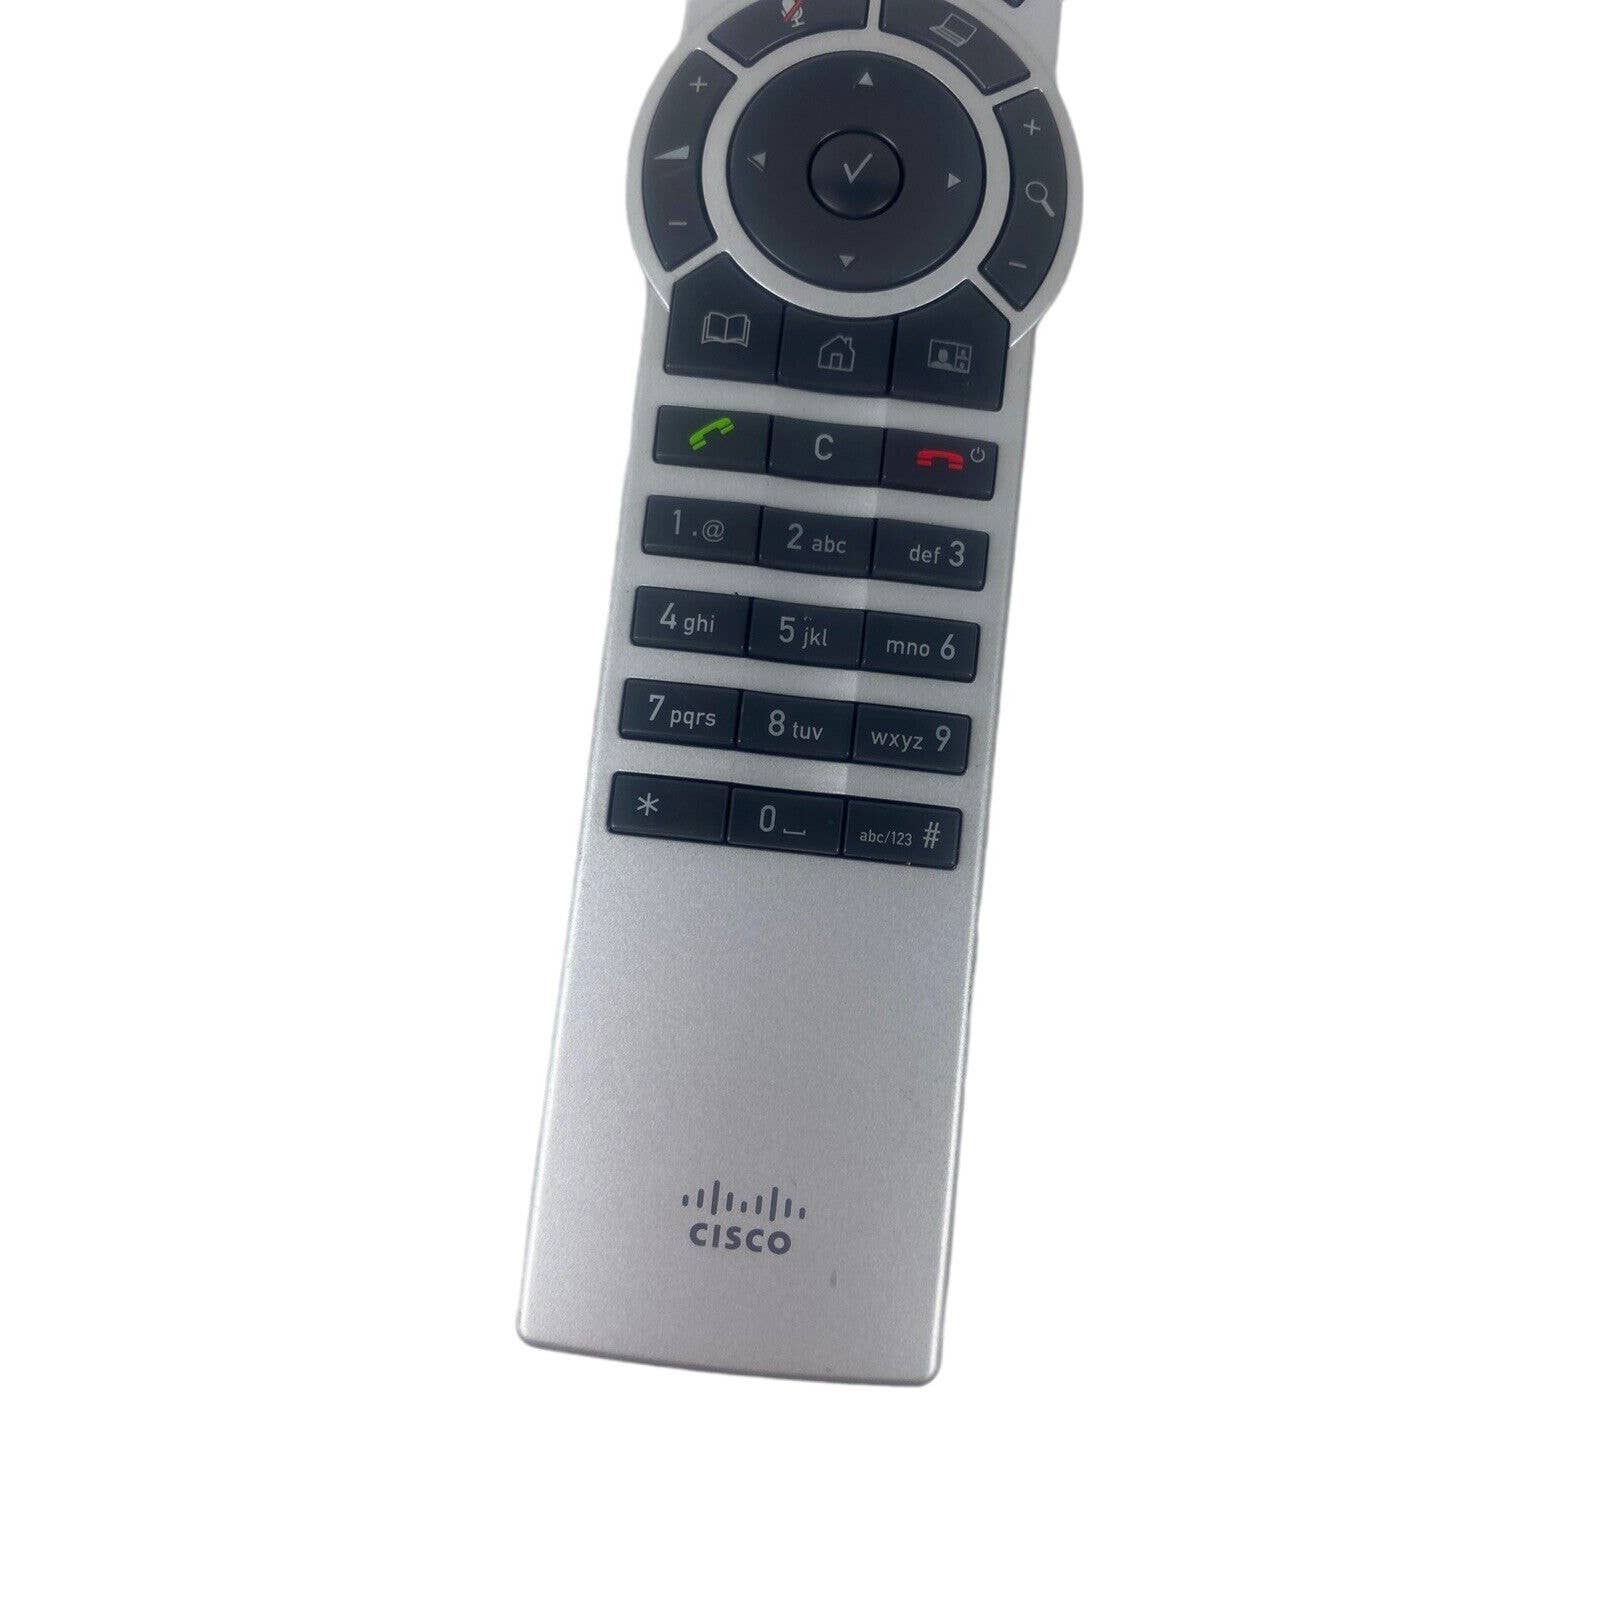 video conferencing for remotes